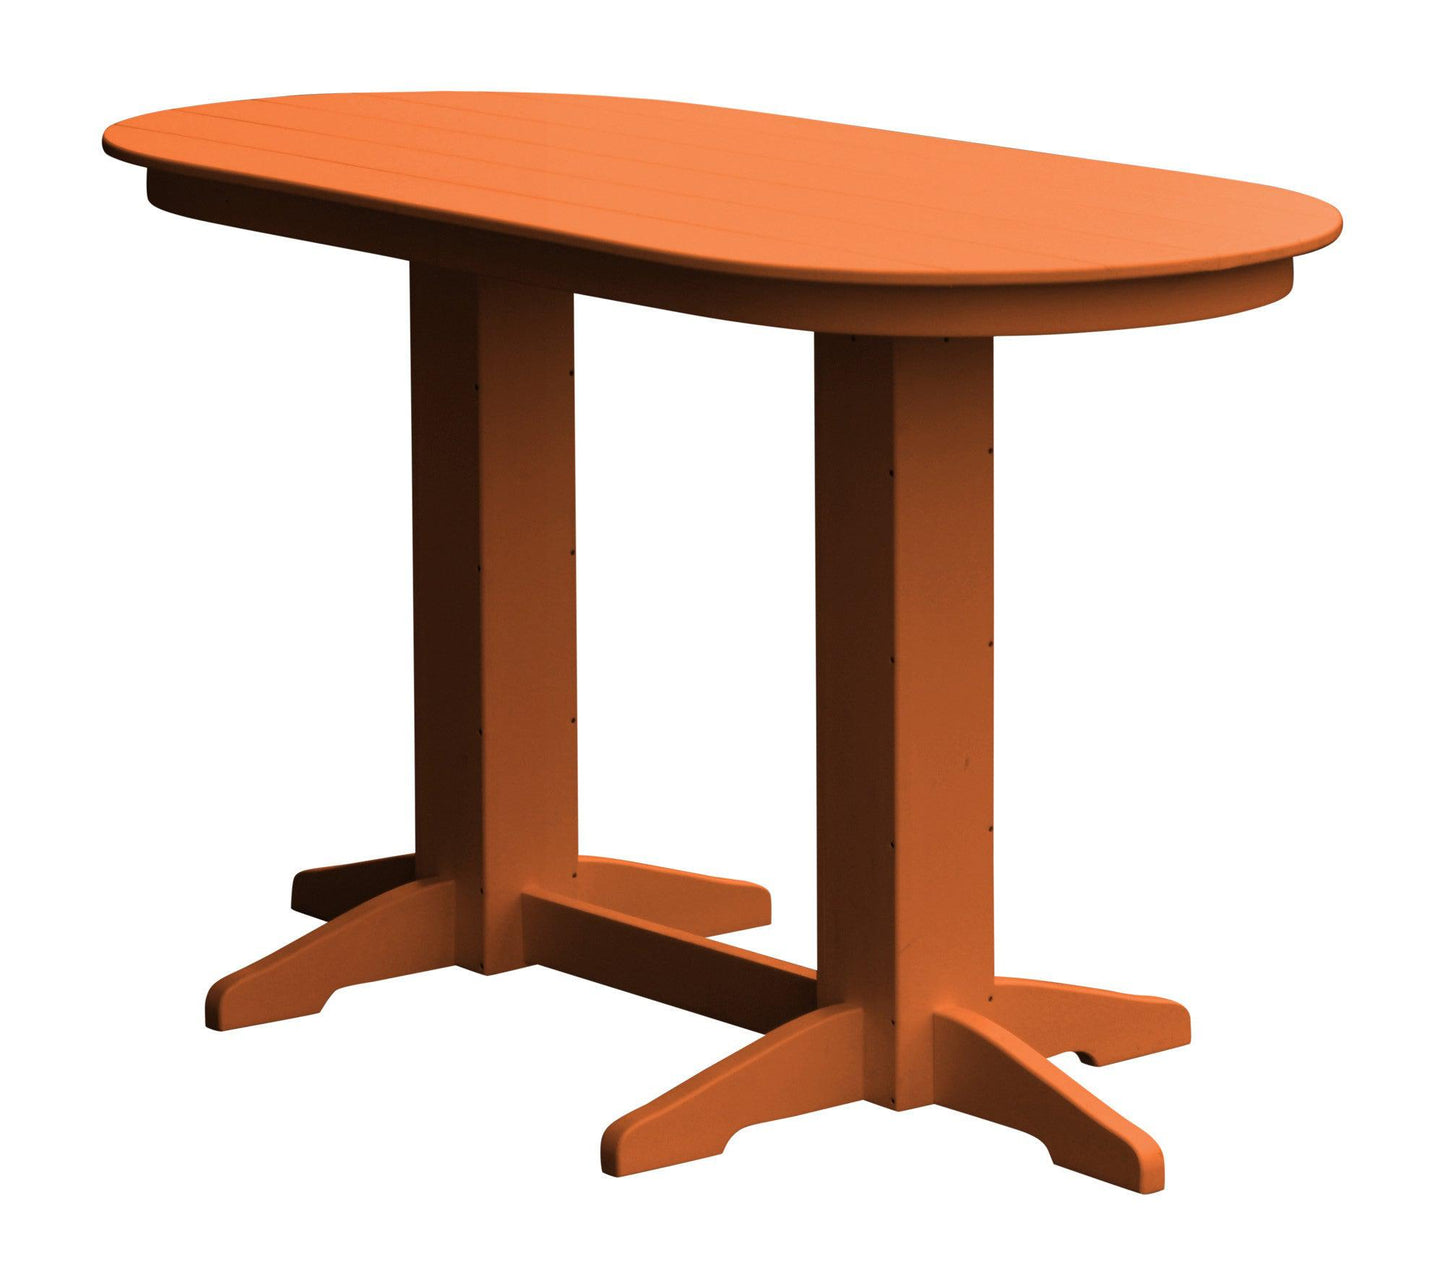 A&L Furniture Recycled Plastic 6' Oval Bar Table - Orange